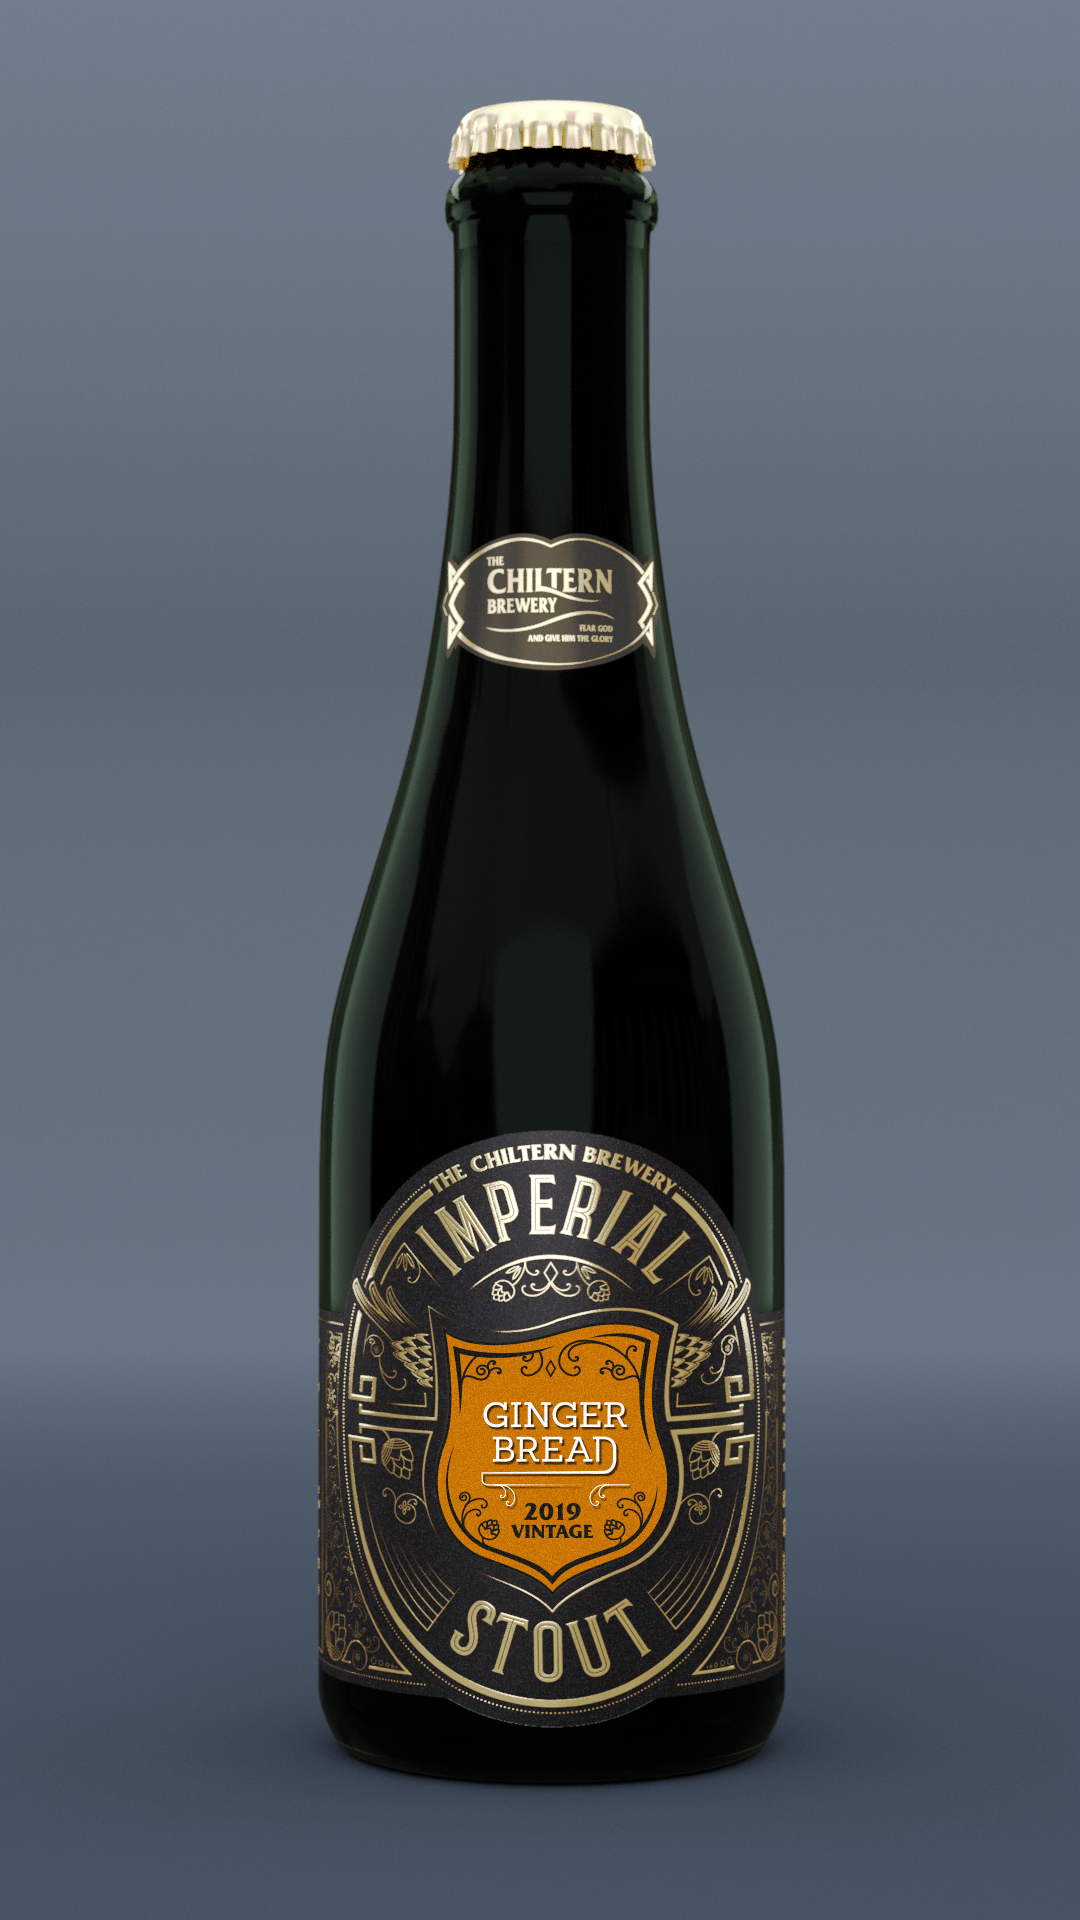 Imperial Stout 2019 Vintage – Gingerbread